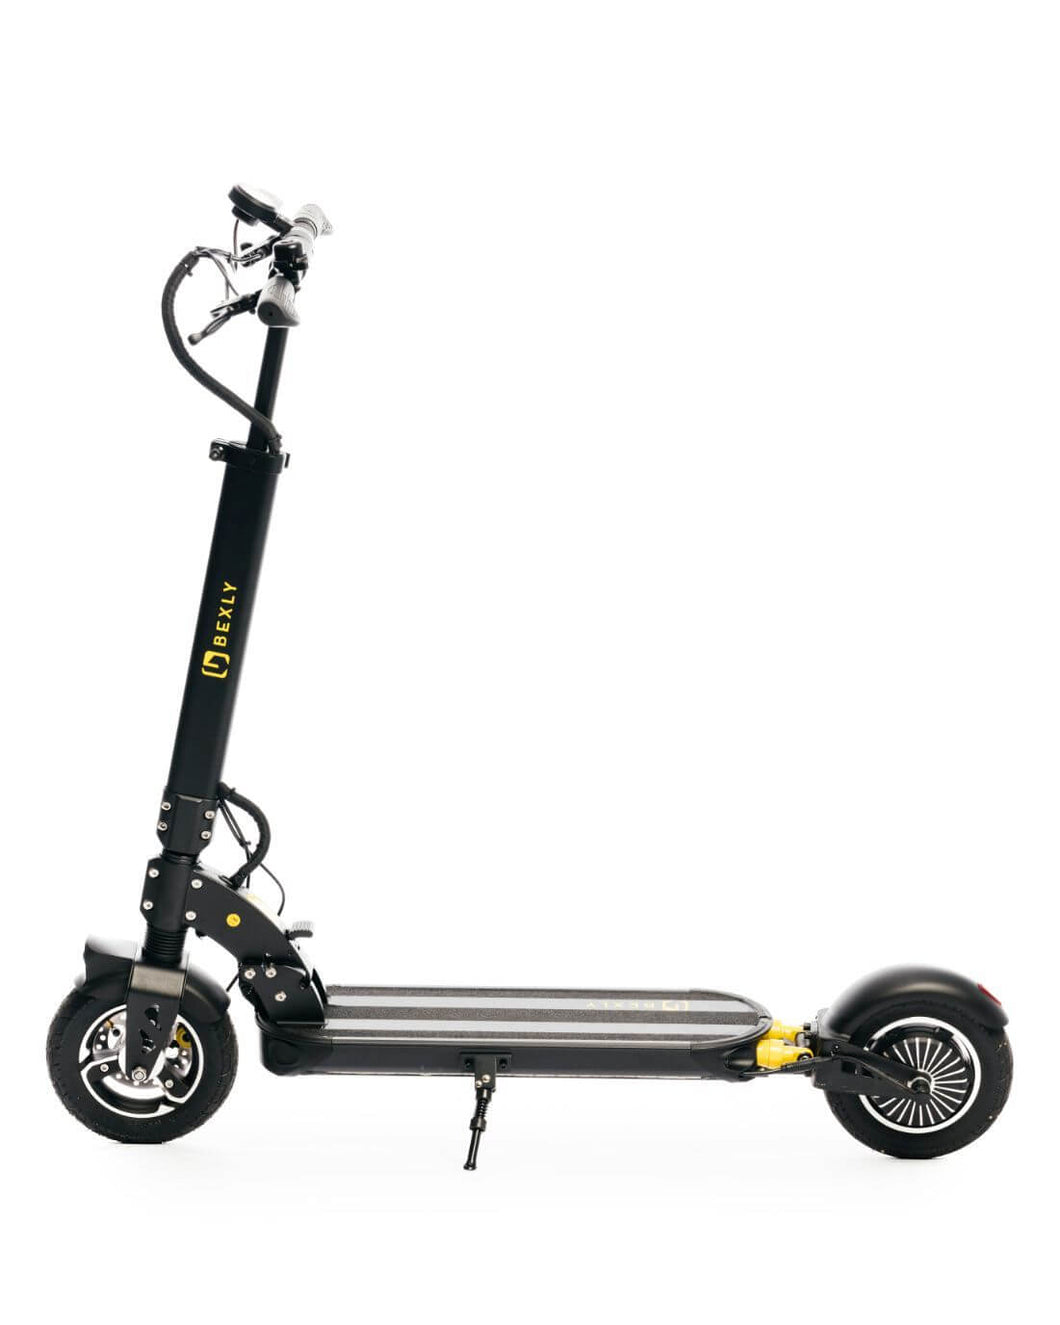 Bexly 9 Electric Scooter 13ah